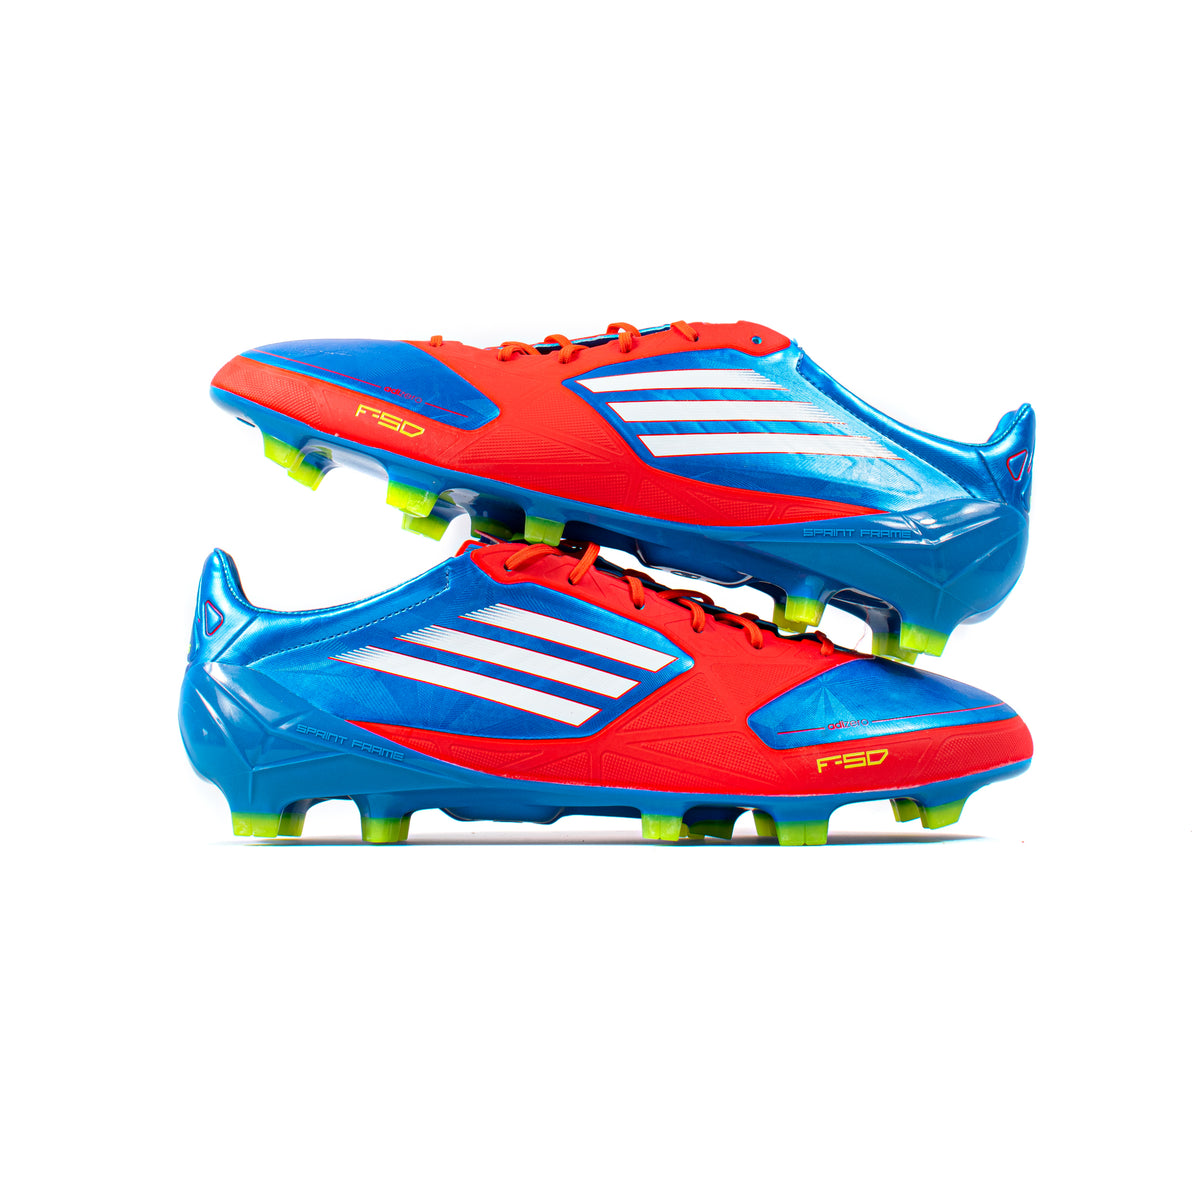 Adidas F50 Adizero Blue Red Synthetic FG – Classic Soccer Cleats